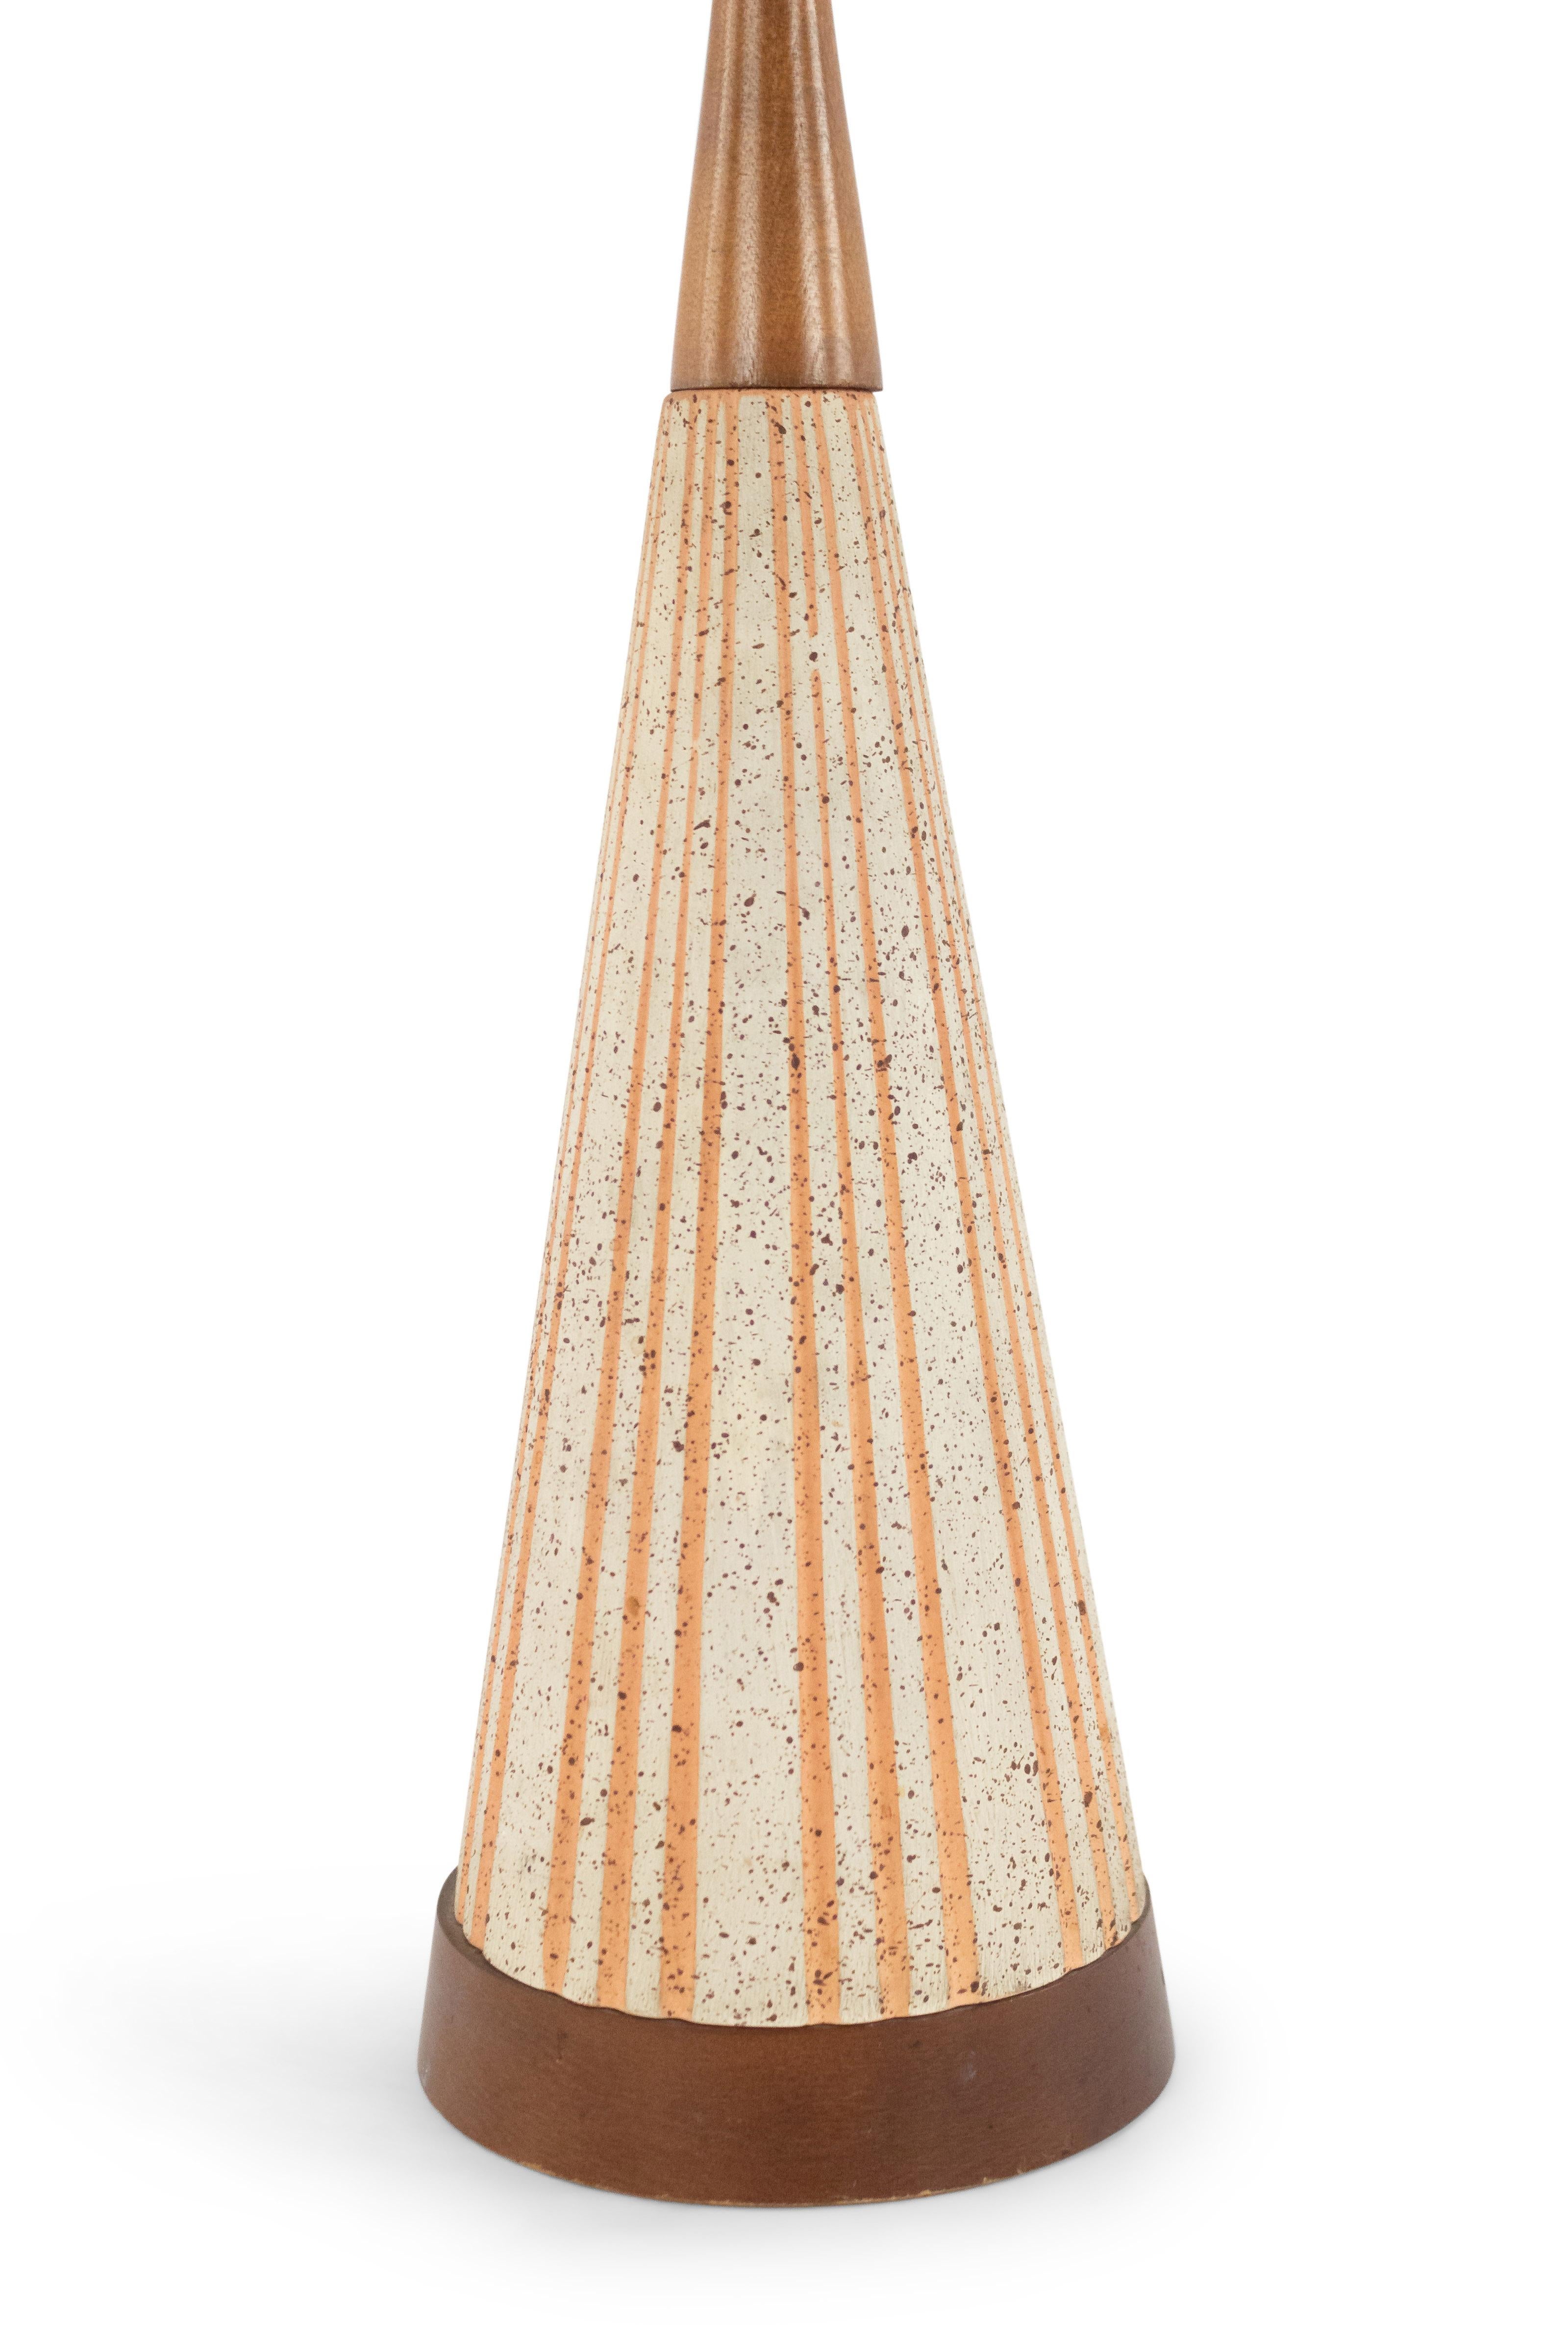 American midcentury (1960s) beige cone shaped ceramic table lamp with an orange fluted design resting on a round wood base with a similar tapered top.